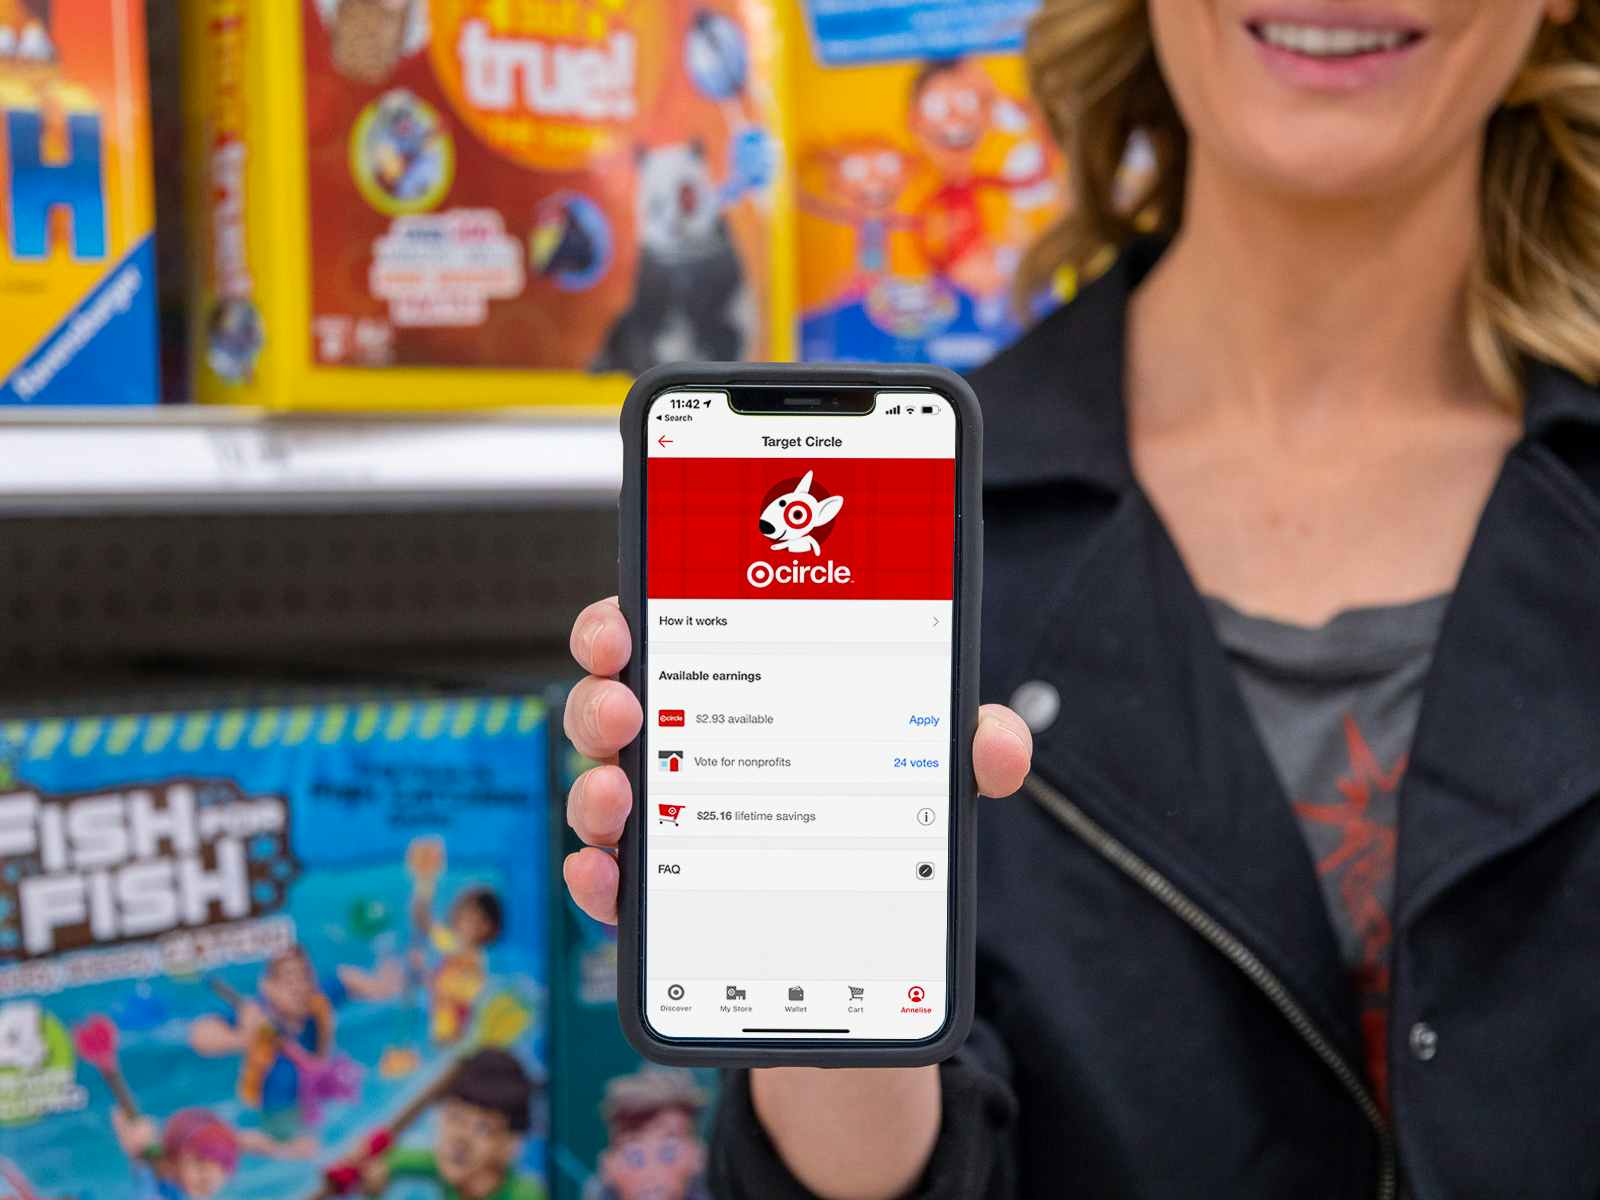 A woman standing in front of toys on a shelf and holding up her phone, showing her Target Circle account info in the Target app